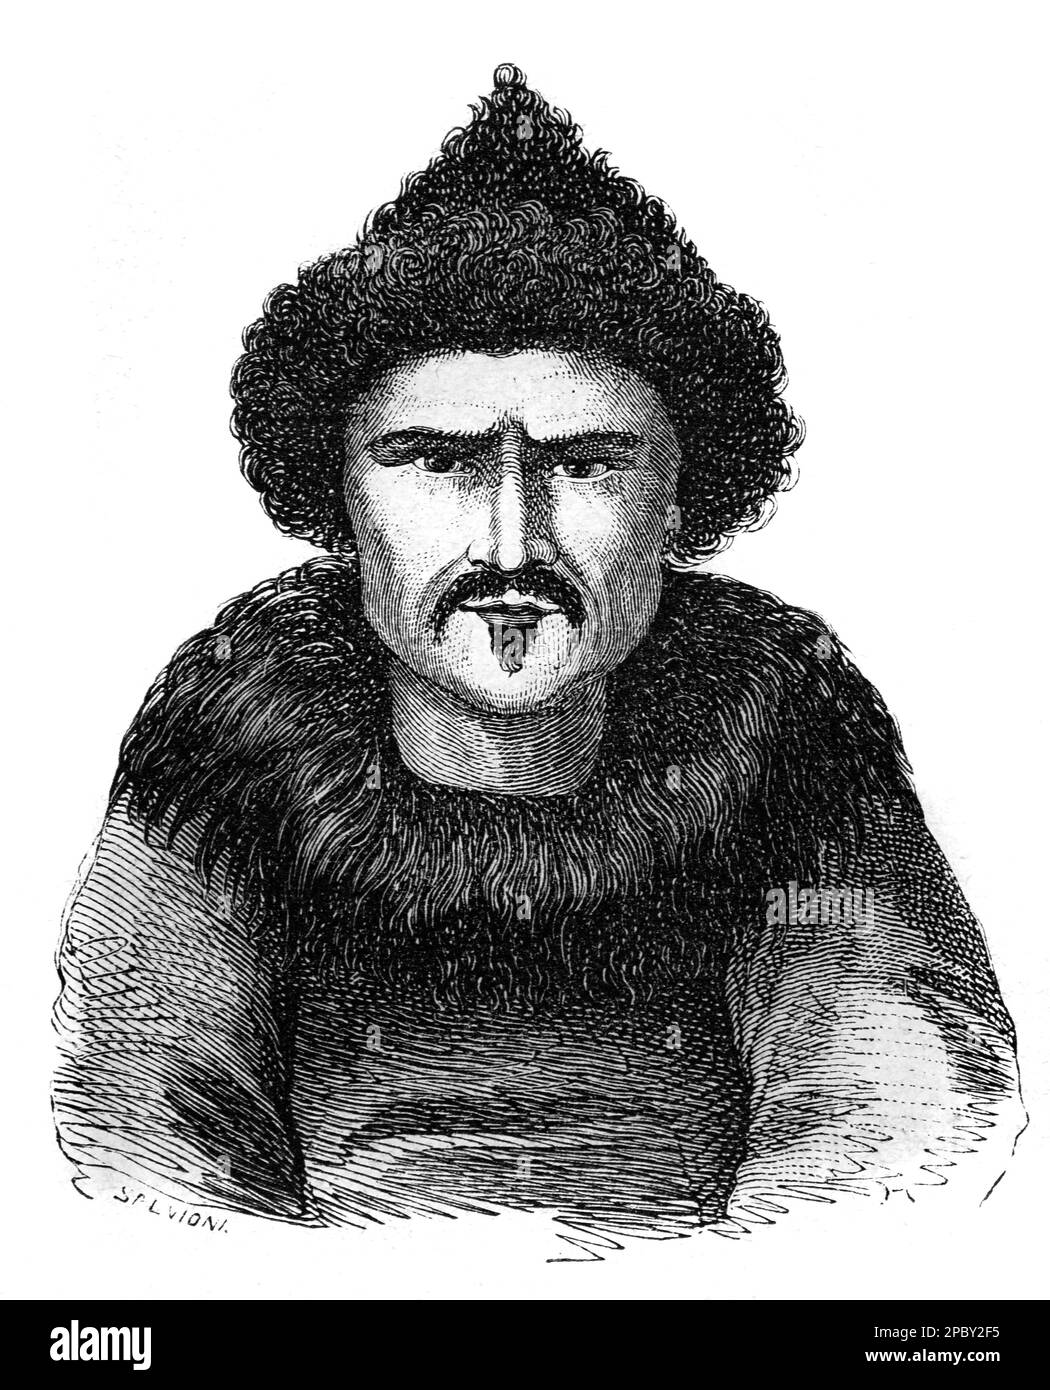 Portrait of a Siberian Man wearing Fur Hat and Winter Clothes Siberia. Vintage or Historical Engraving or Illustration 1862 Stock Photo